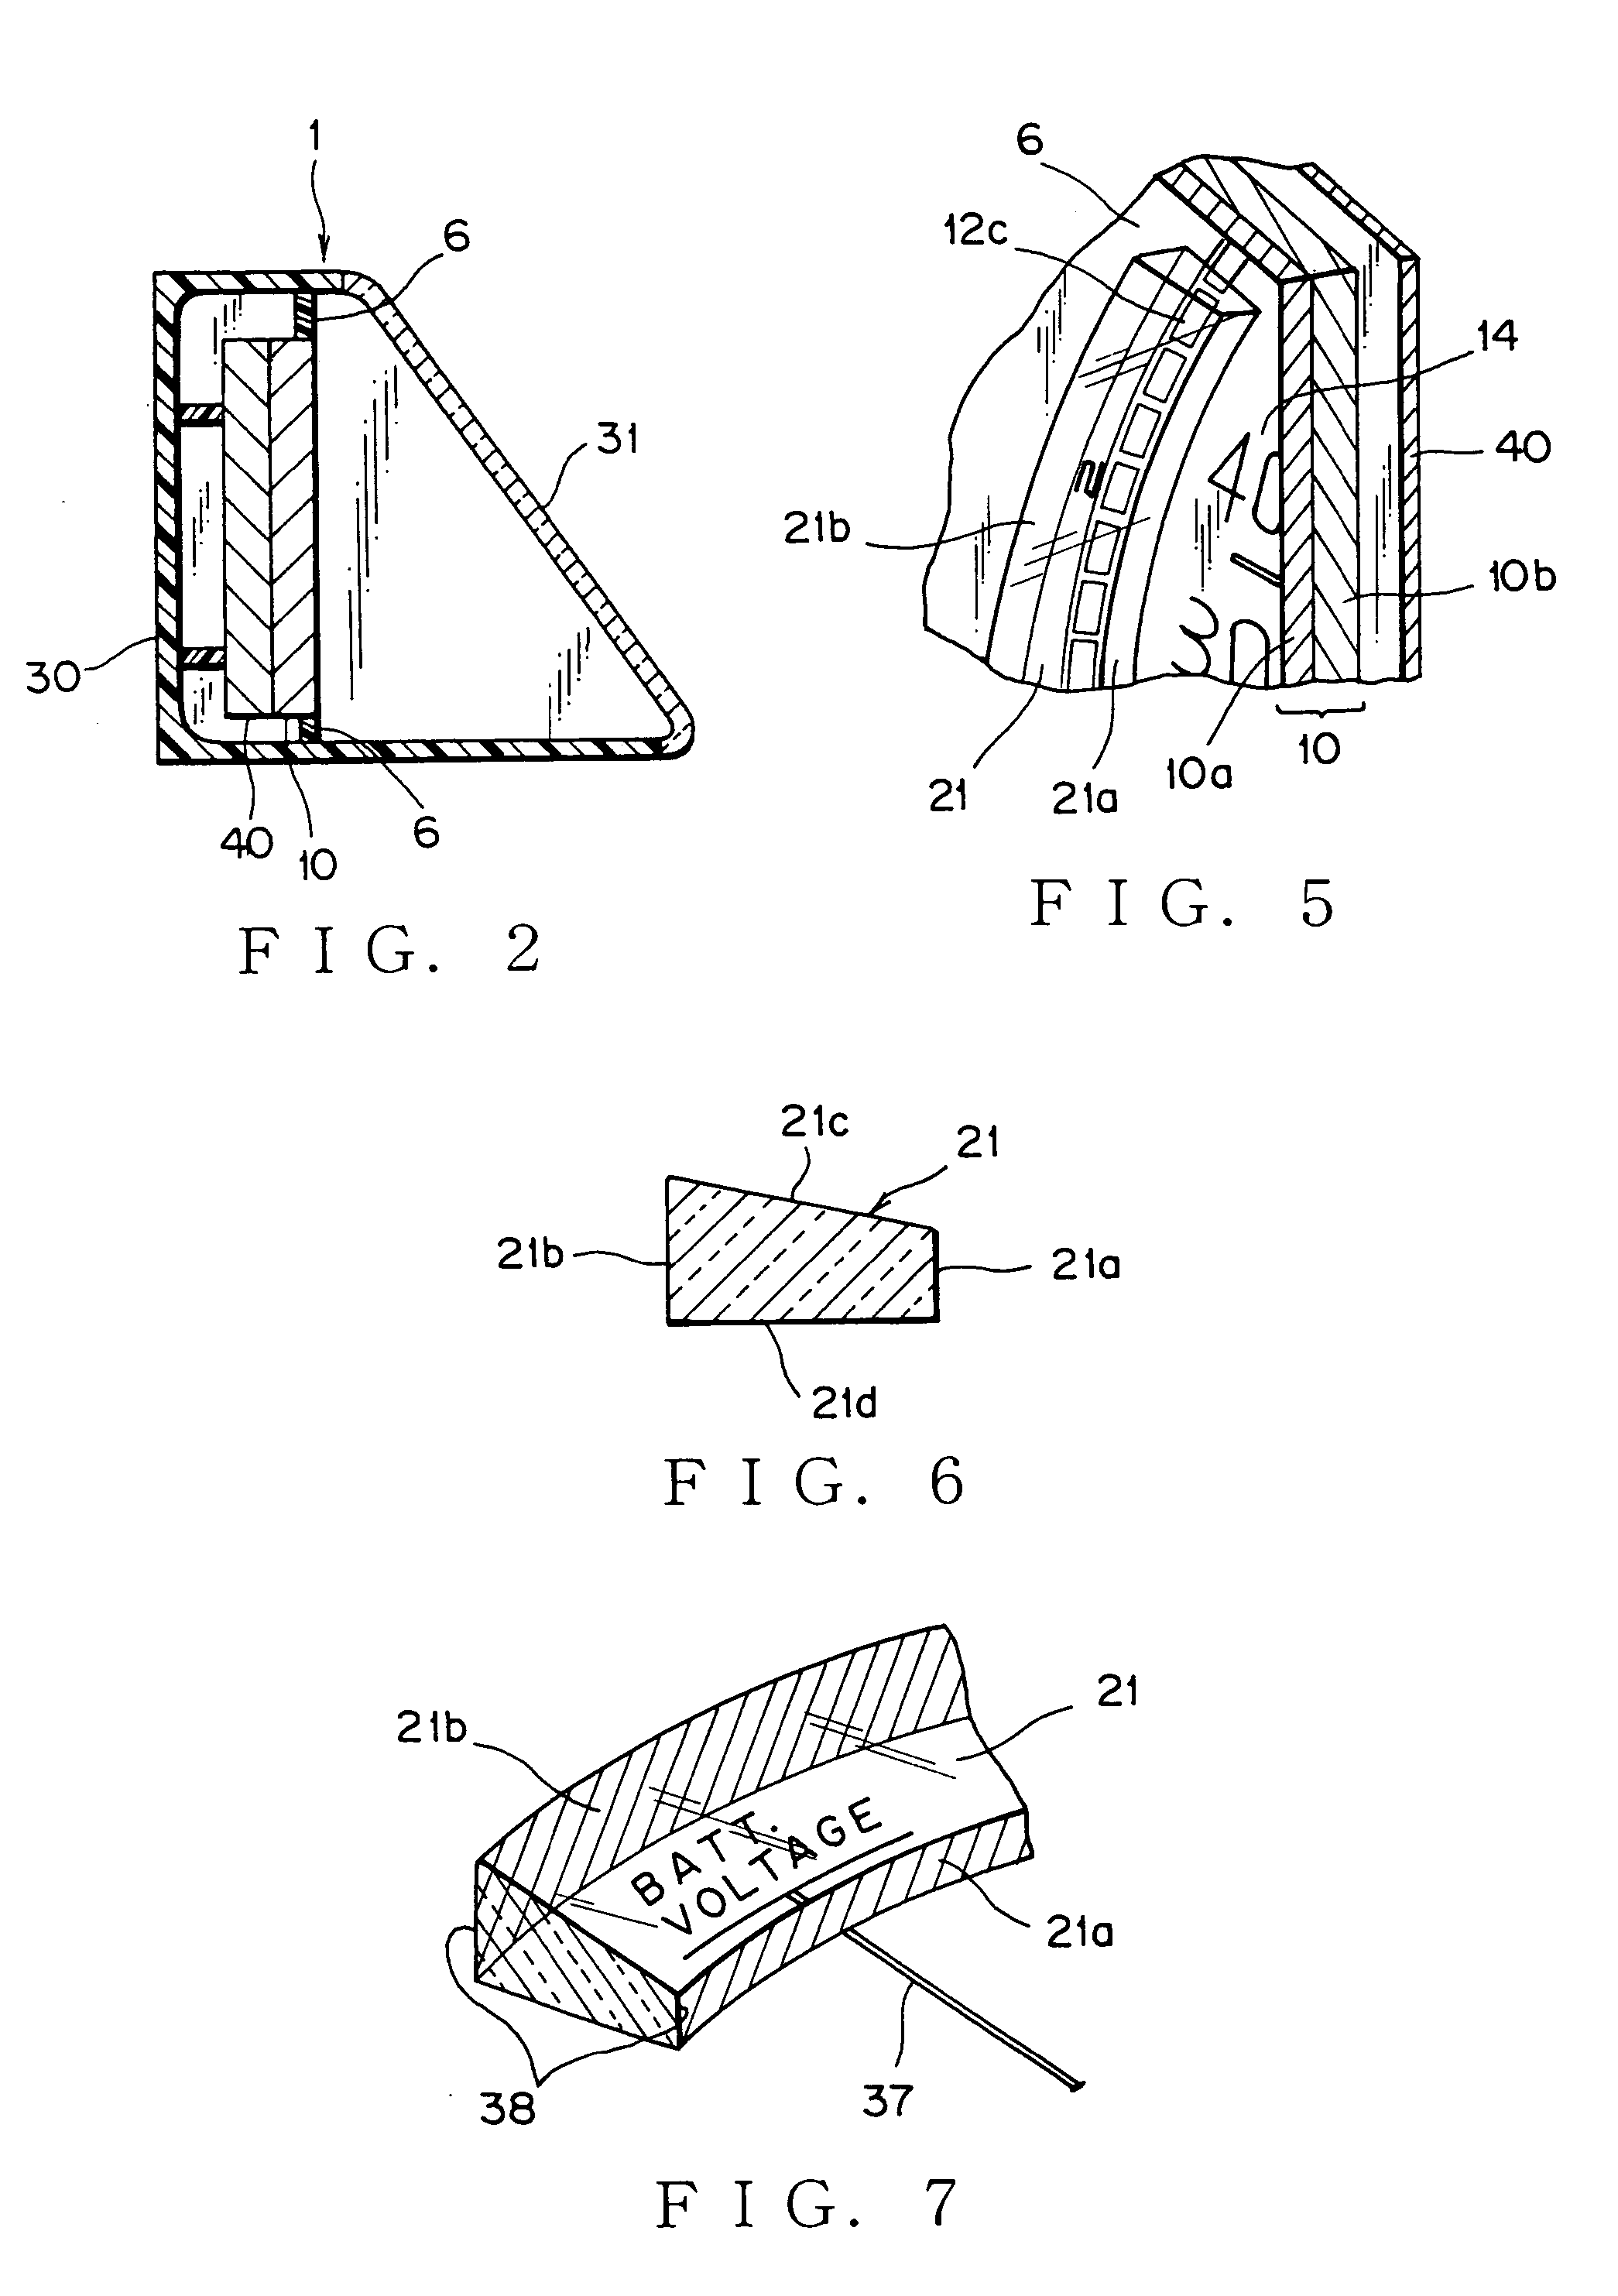 Display apparatus for vehicle